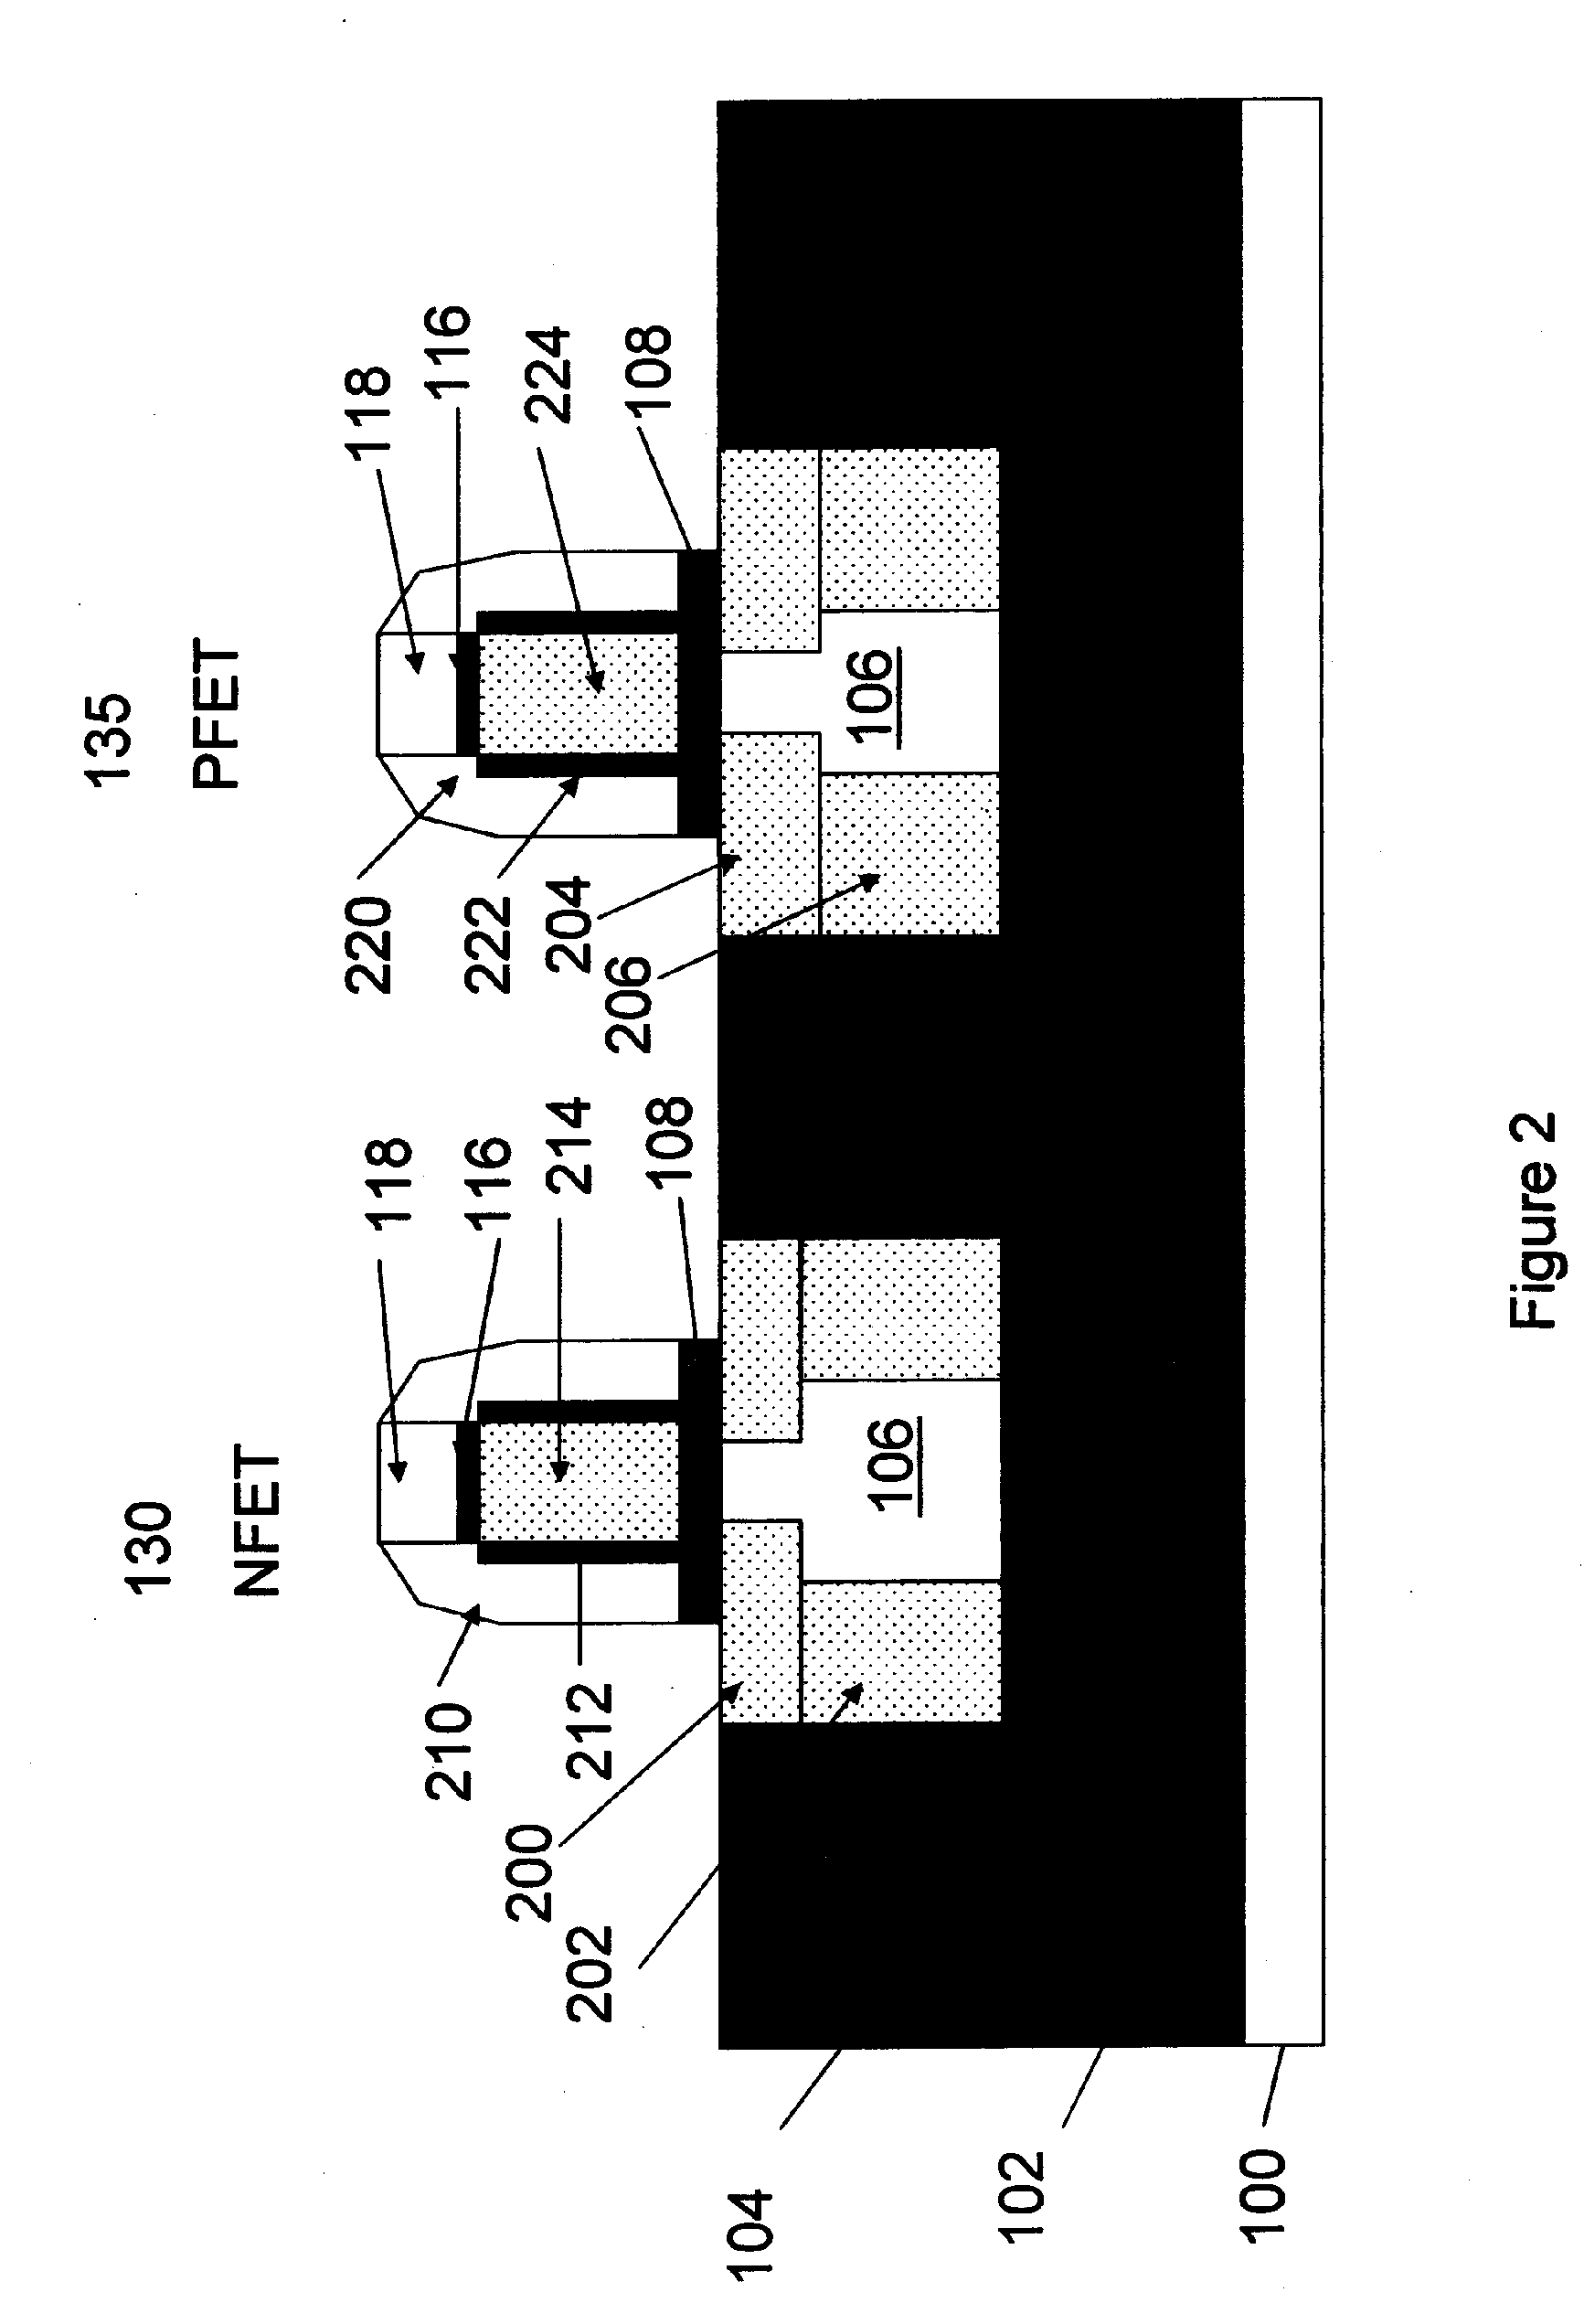 In situ doped embedded sige extension and source/drain for enhanced pfet performance